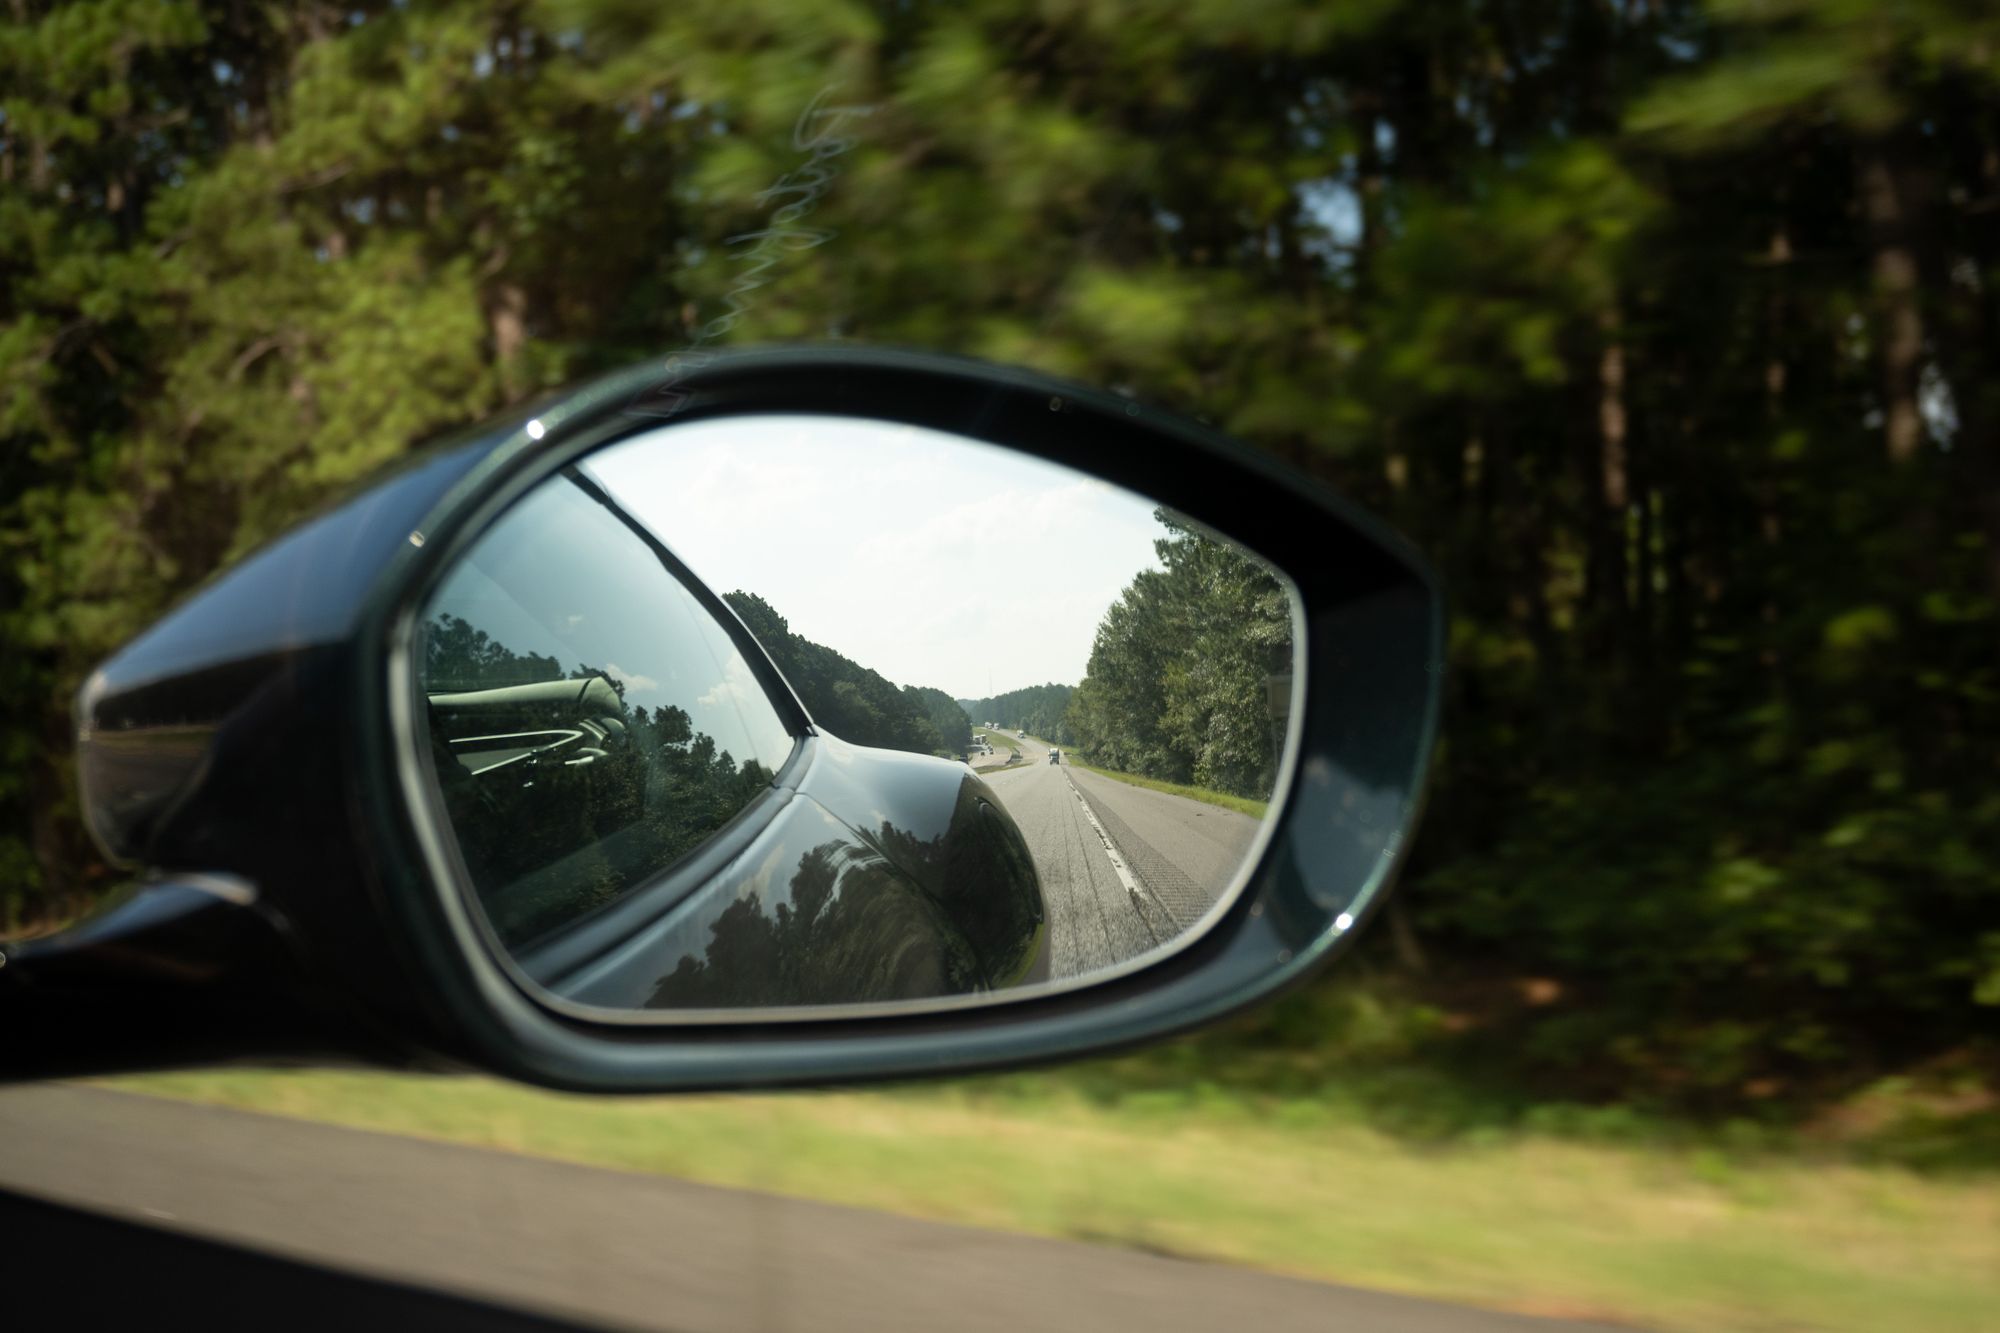 A photo in the passenger side mirror of the car. Trees slip by in the background, while the mirror shows the rear fender of the car and the road behind. There’s a mild hill and curve in the road, the grass is green, and trees line both sides of the freeway.